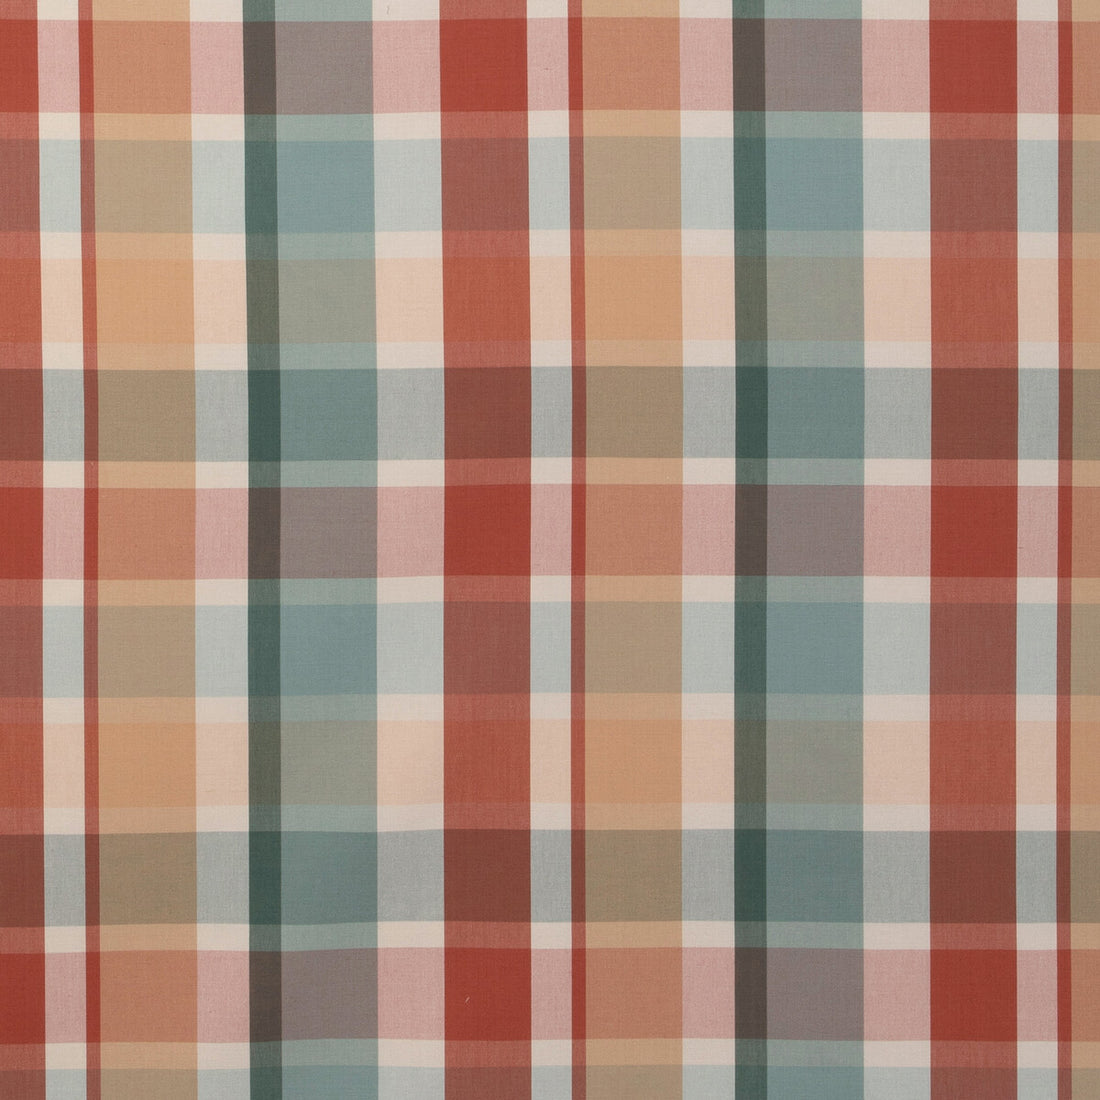 Fisher Plaid fabric in teal/spice color - pattern 2023107.519.0 - by Lee Jofa in the Highfield Stripes And Plaids collection